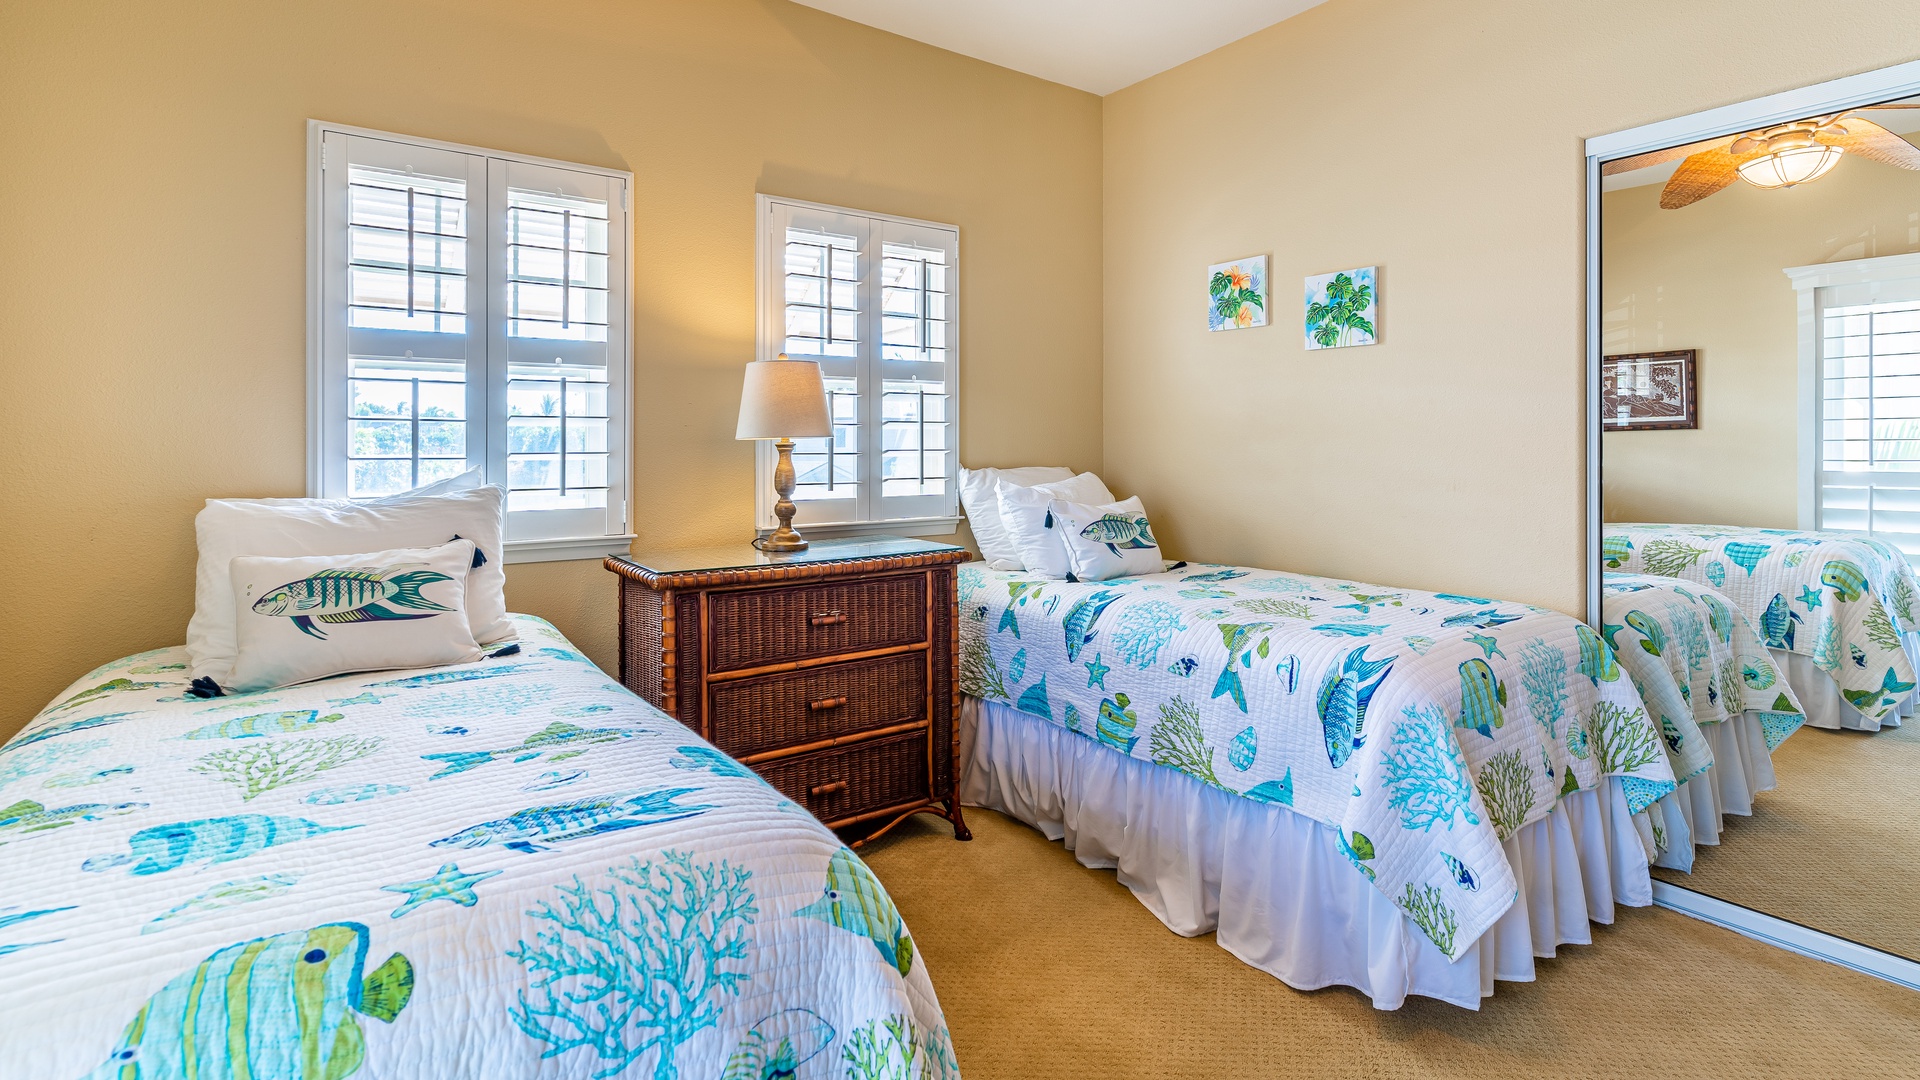 Kapolei Vacation Rentals, Coconut Plantation 1174-2 - The third guest bedroom upstairs with twin beds and ocean decor.